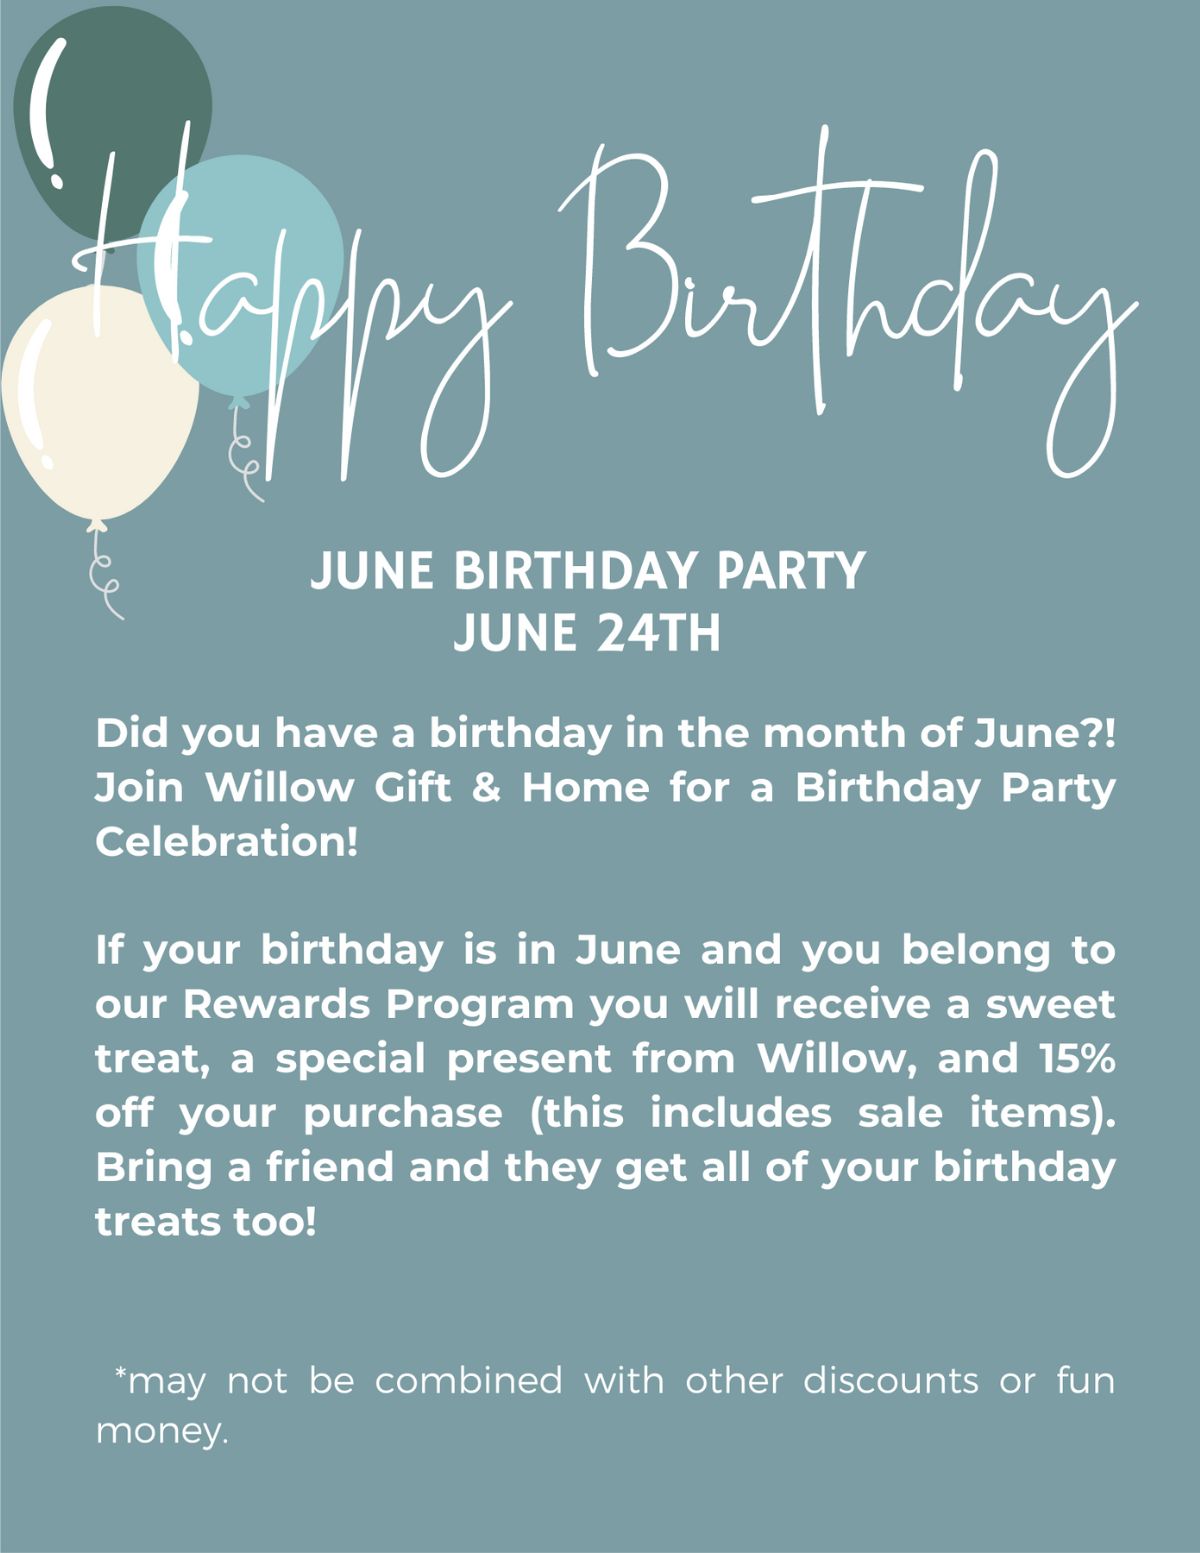 June Birthday Party will be on June 24th